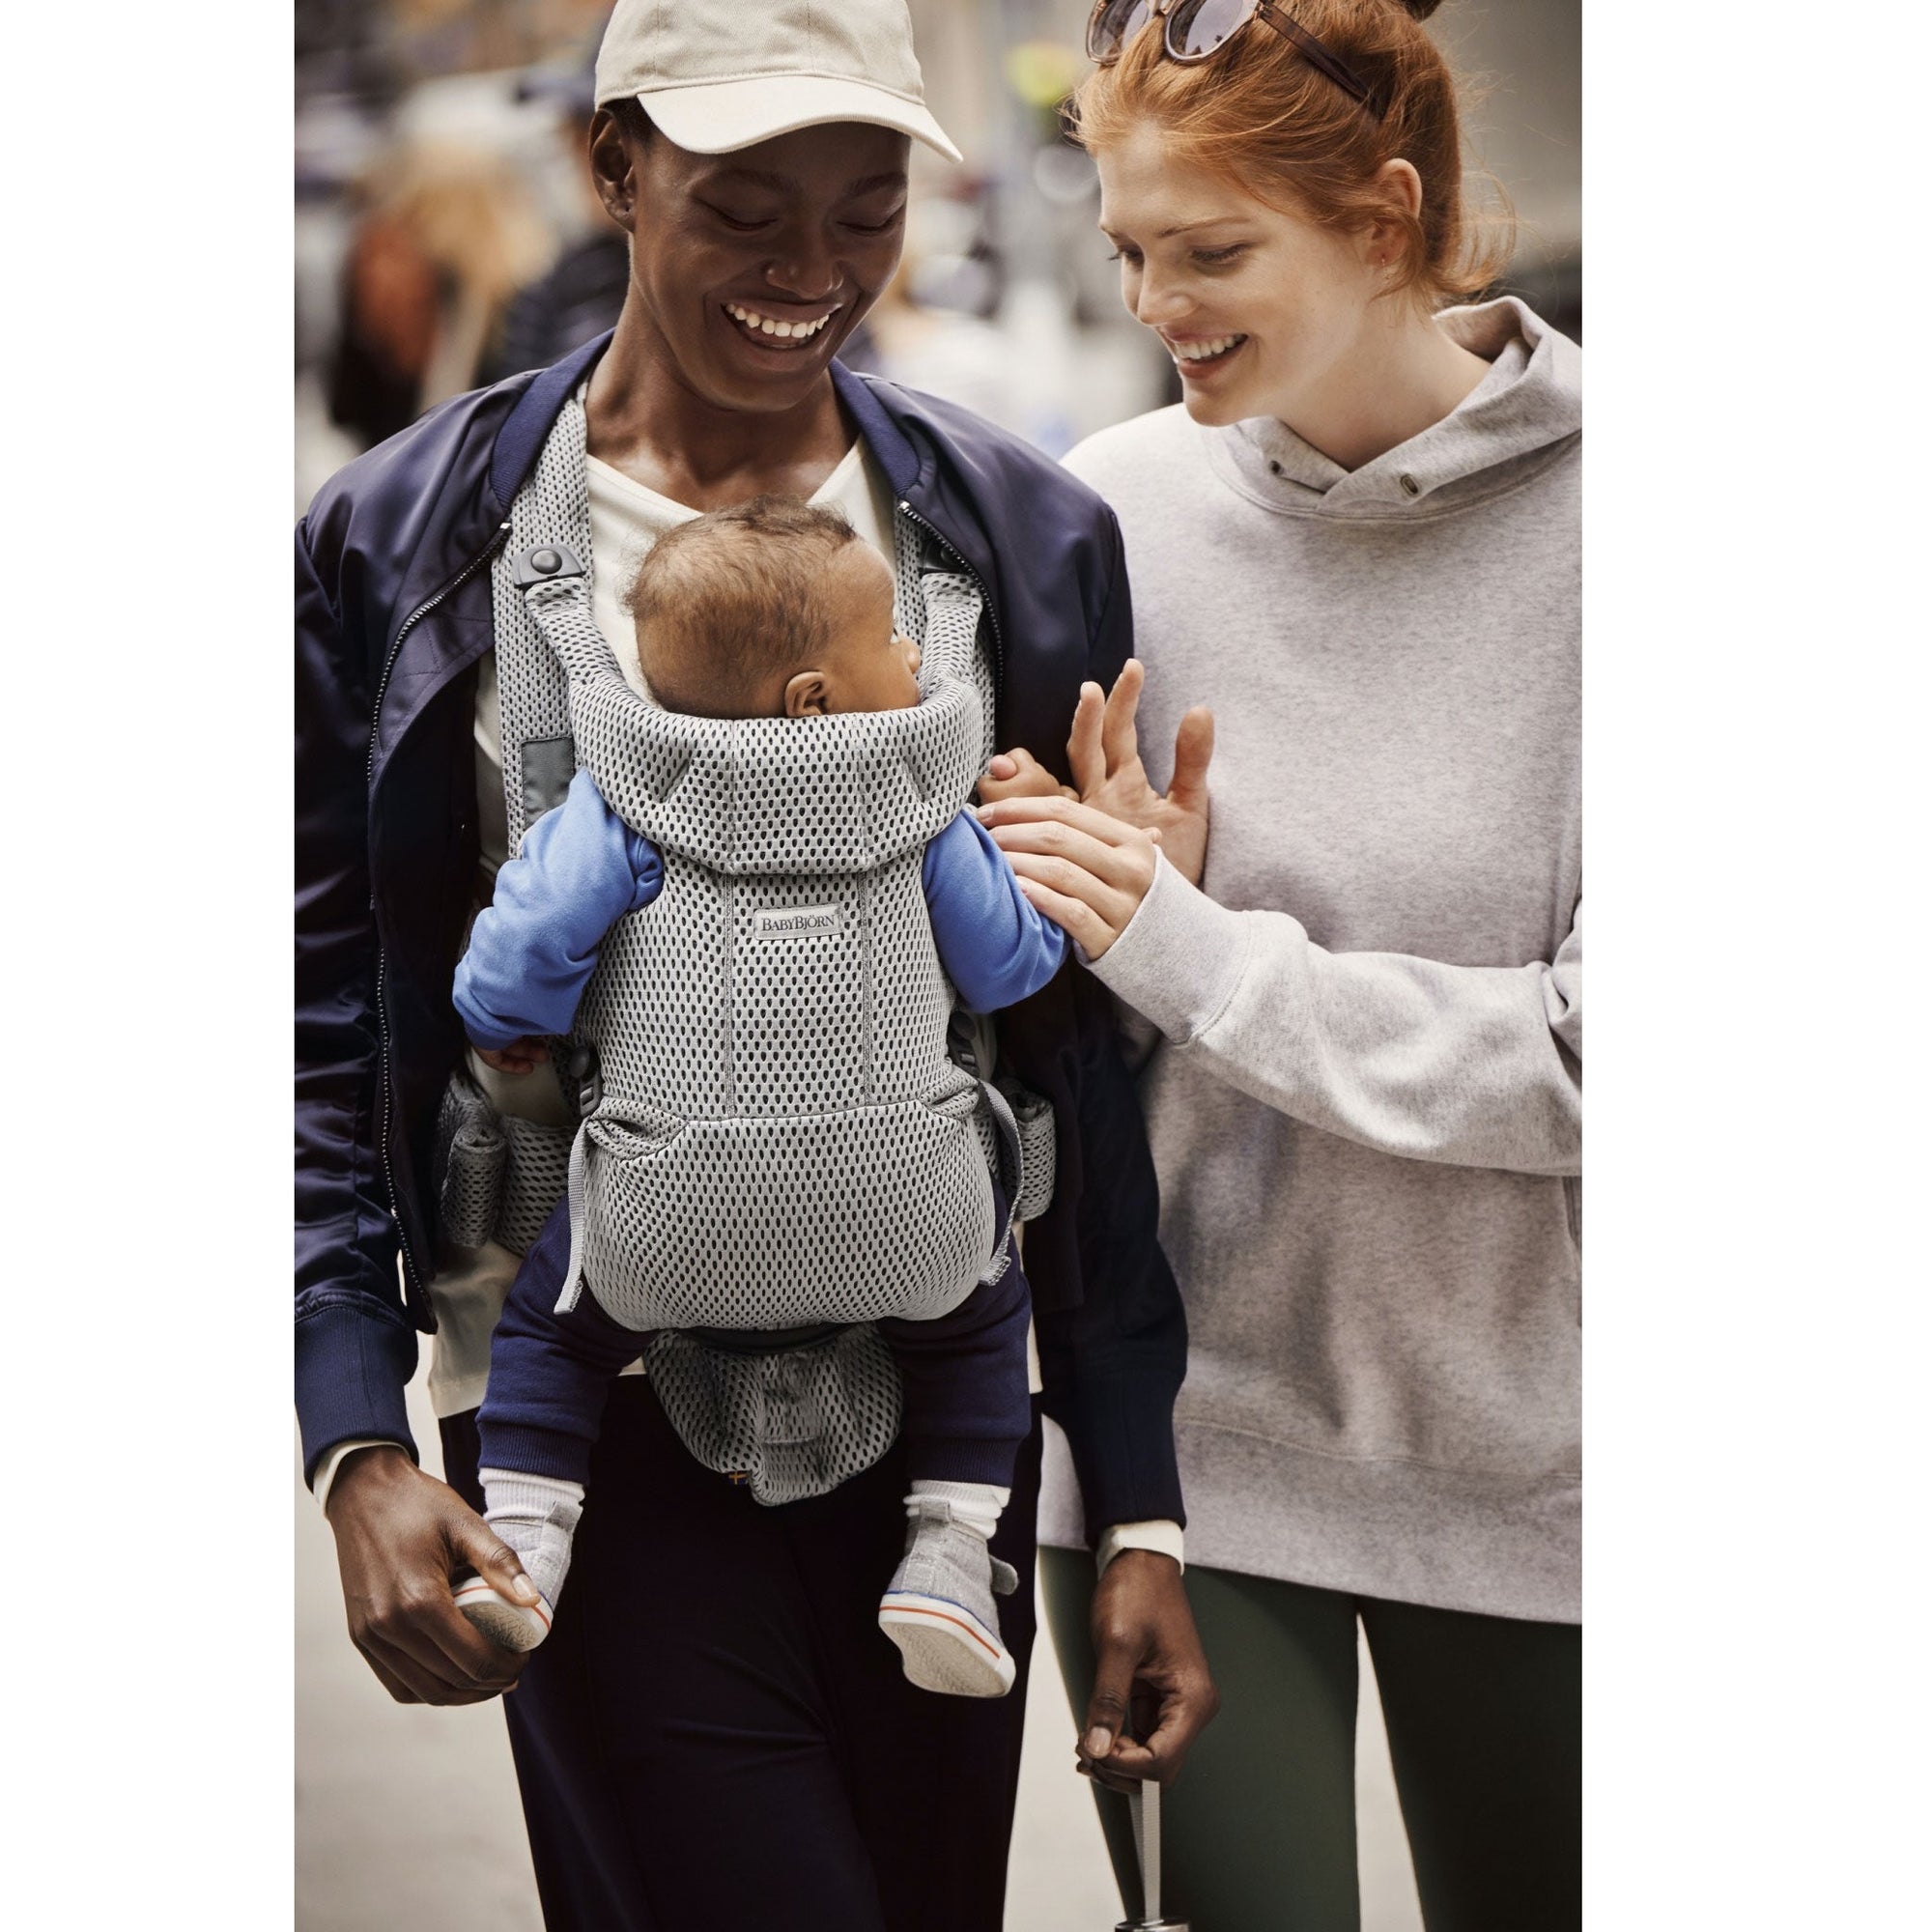 Baby Carrier One Air in flexible, airy mesh